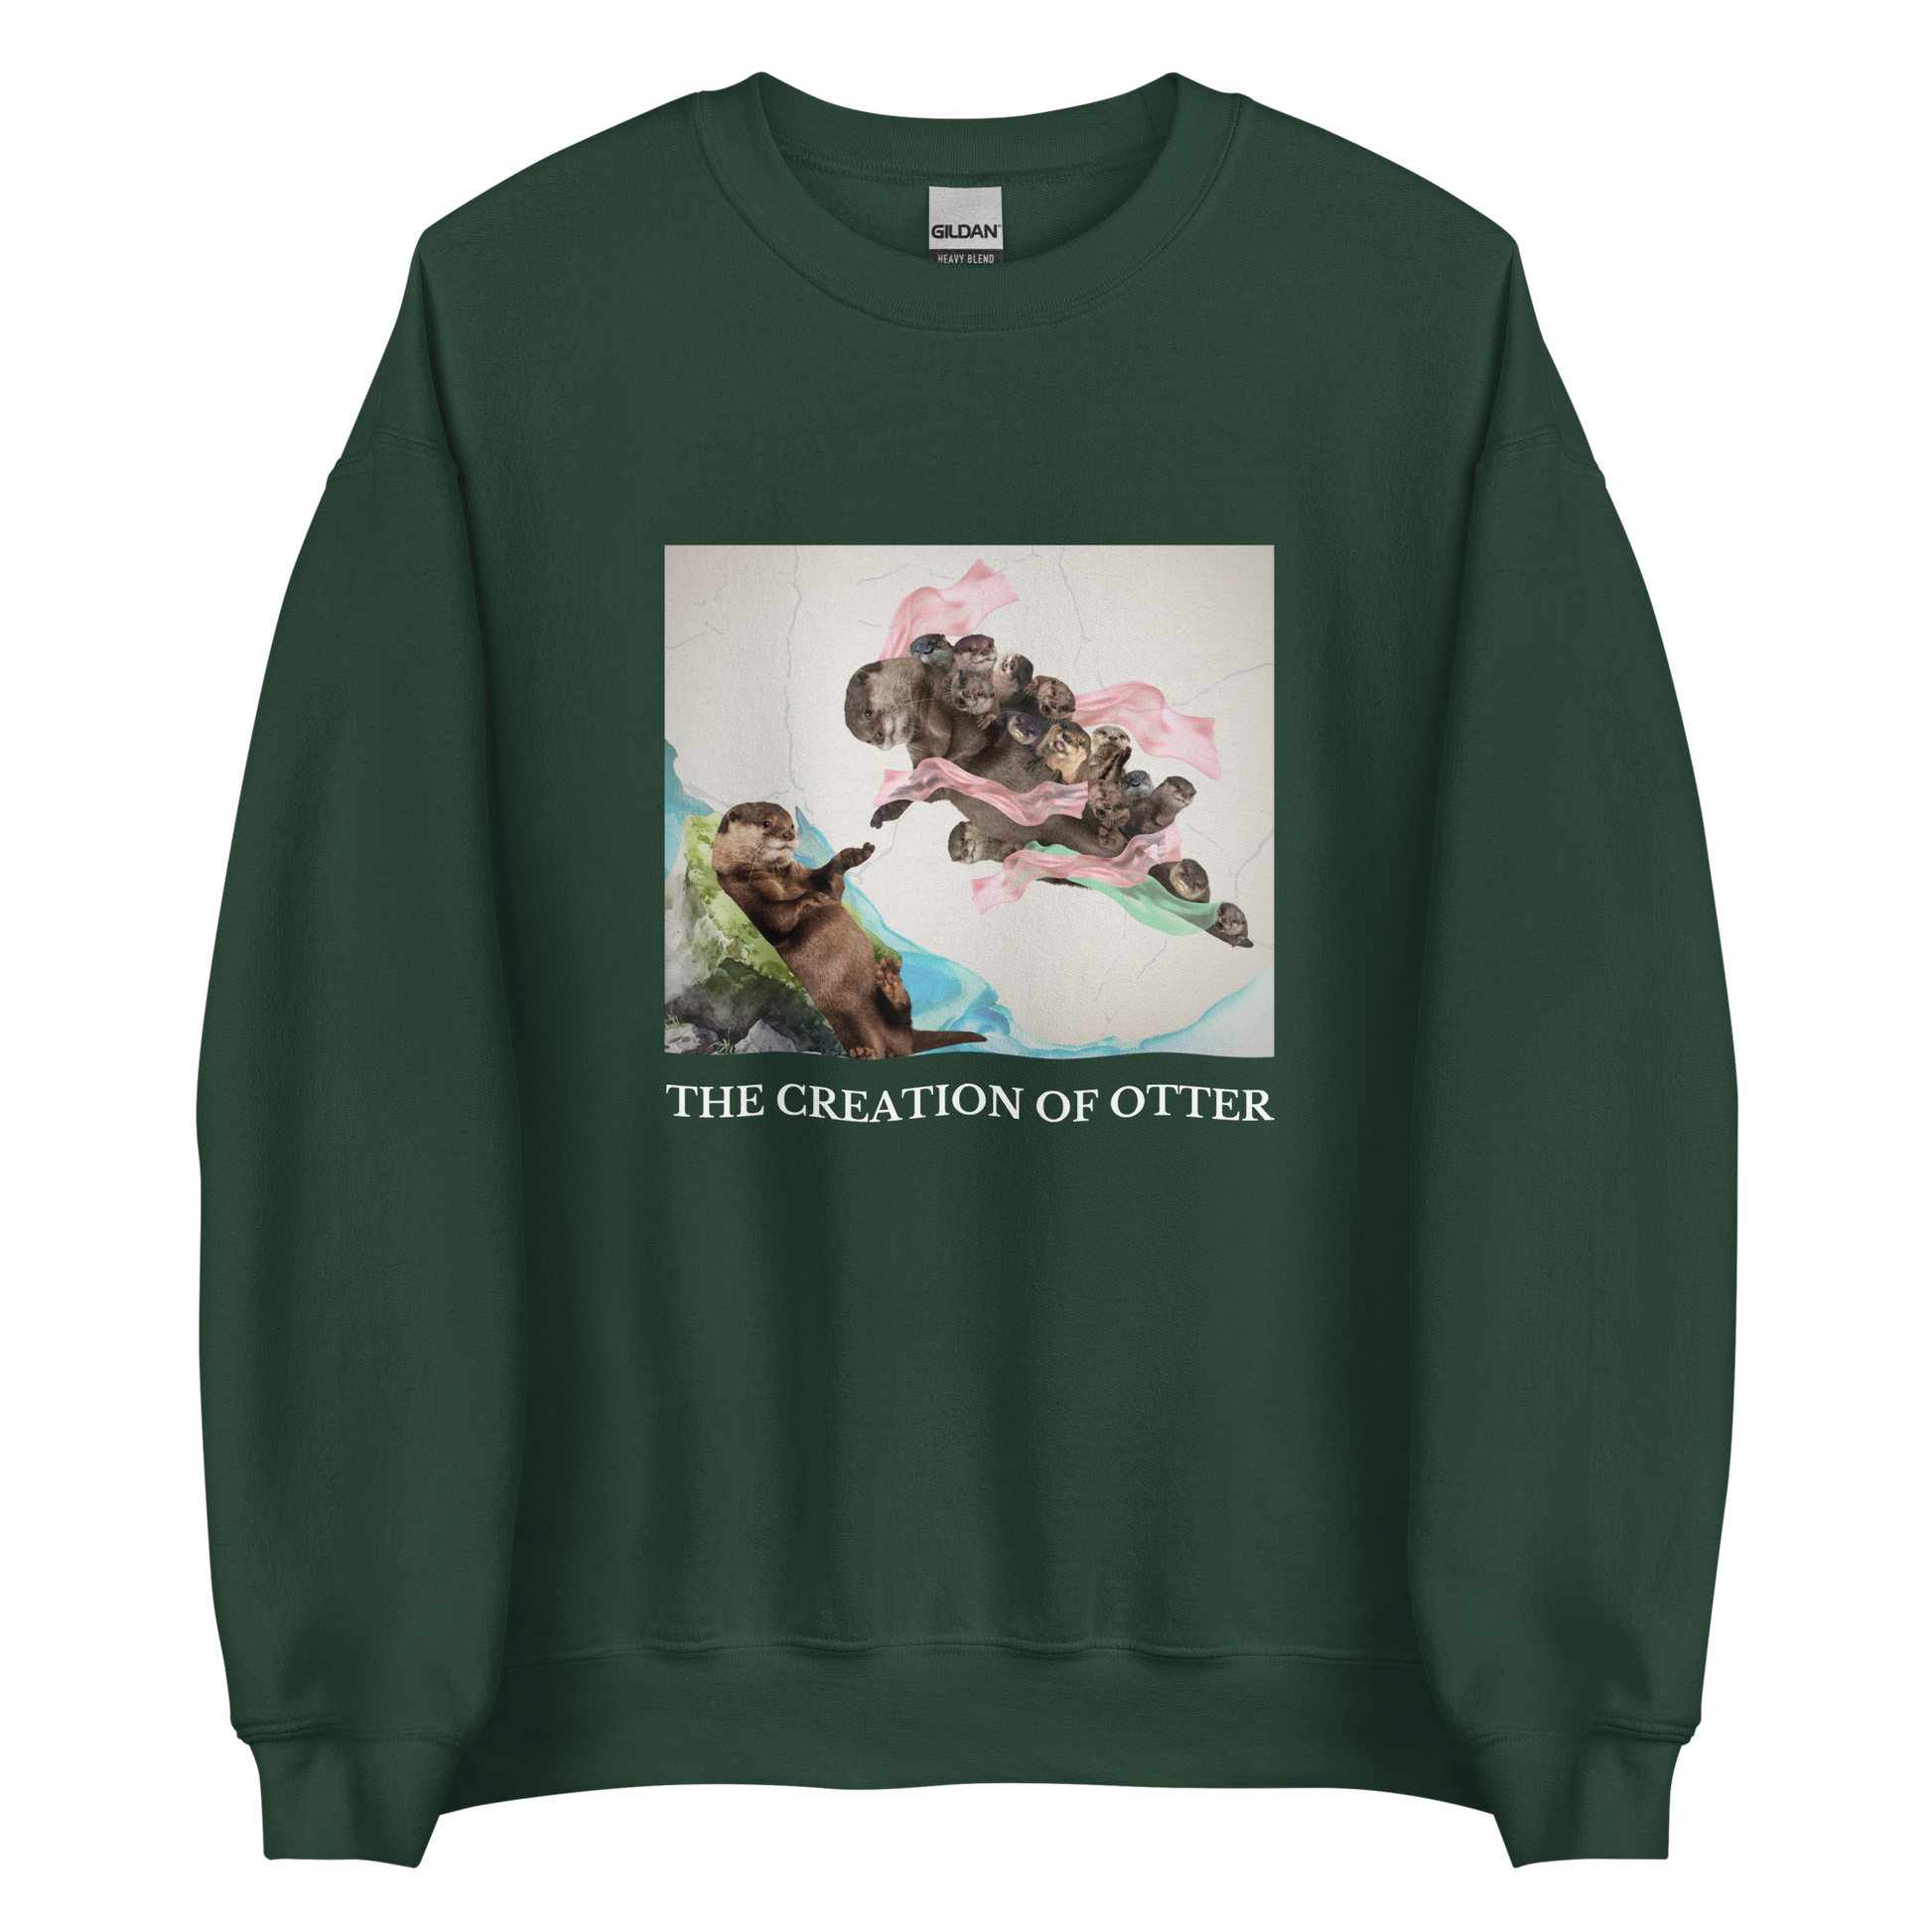 Forest Green Otter Sweatshirt featuring a playful The Creation of Otter parody of Michelangelo's masterpiece - Artsy/Funny Graphic Otter Sweatshirts - Boozy Fox